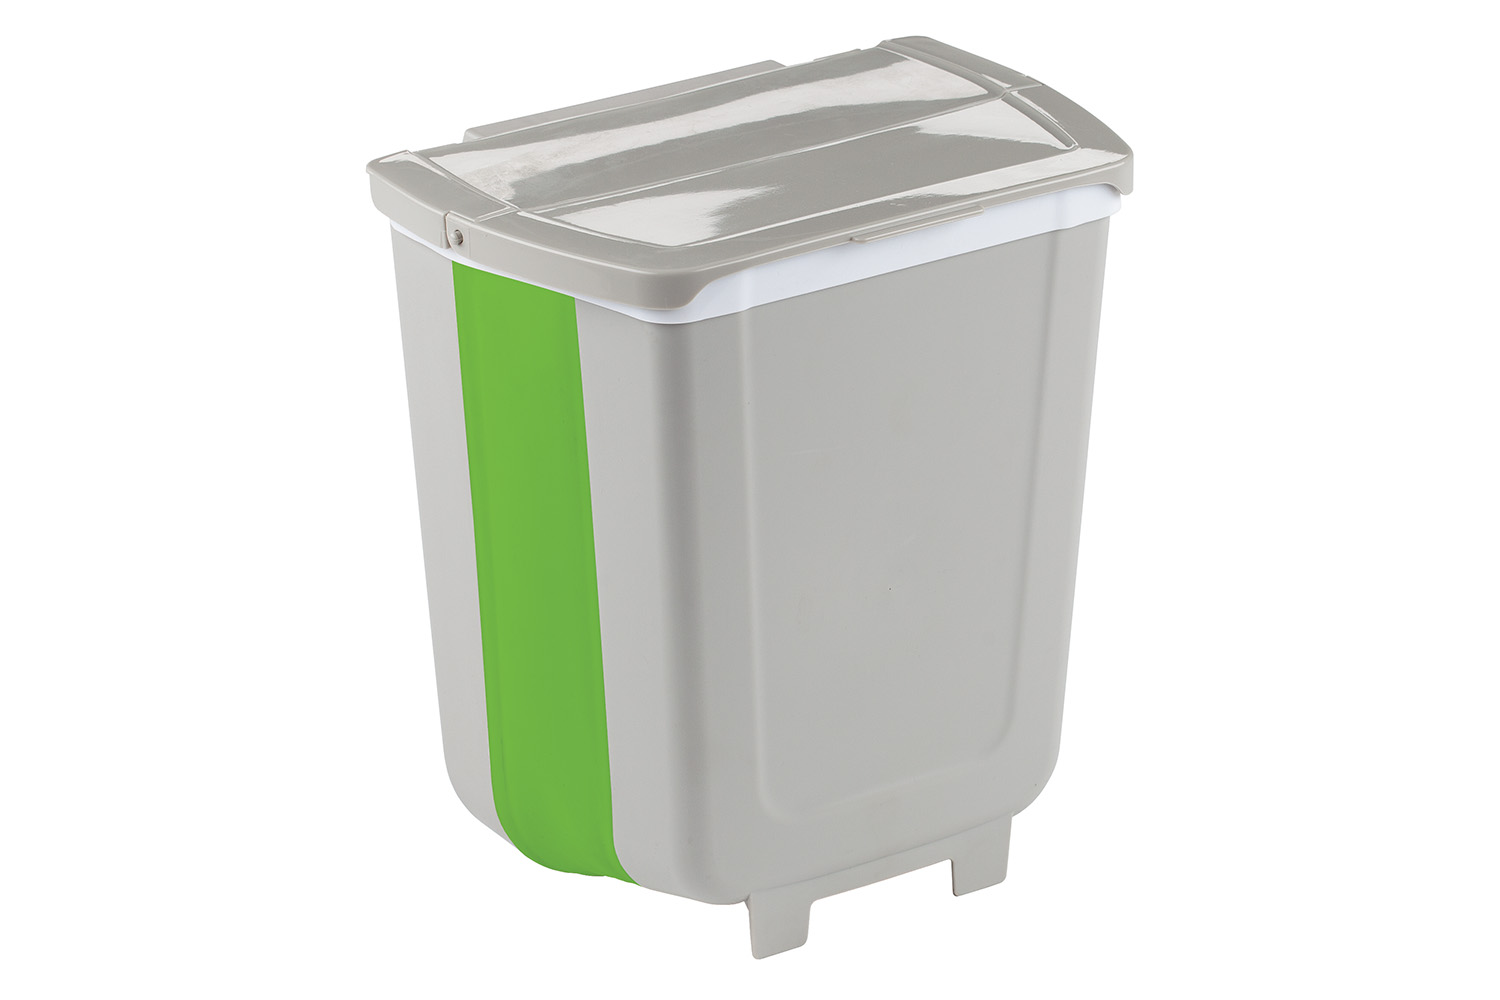 Collapsible Storage Tub with Lid - 30L